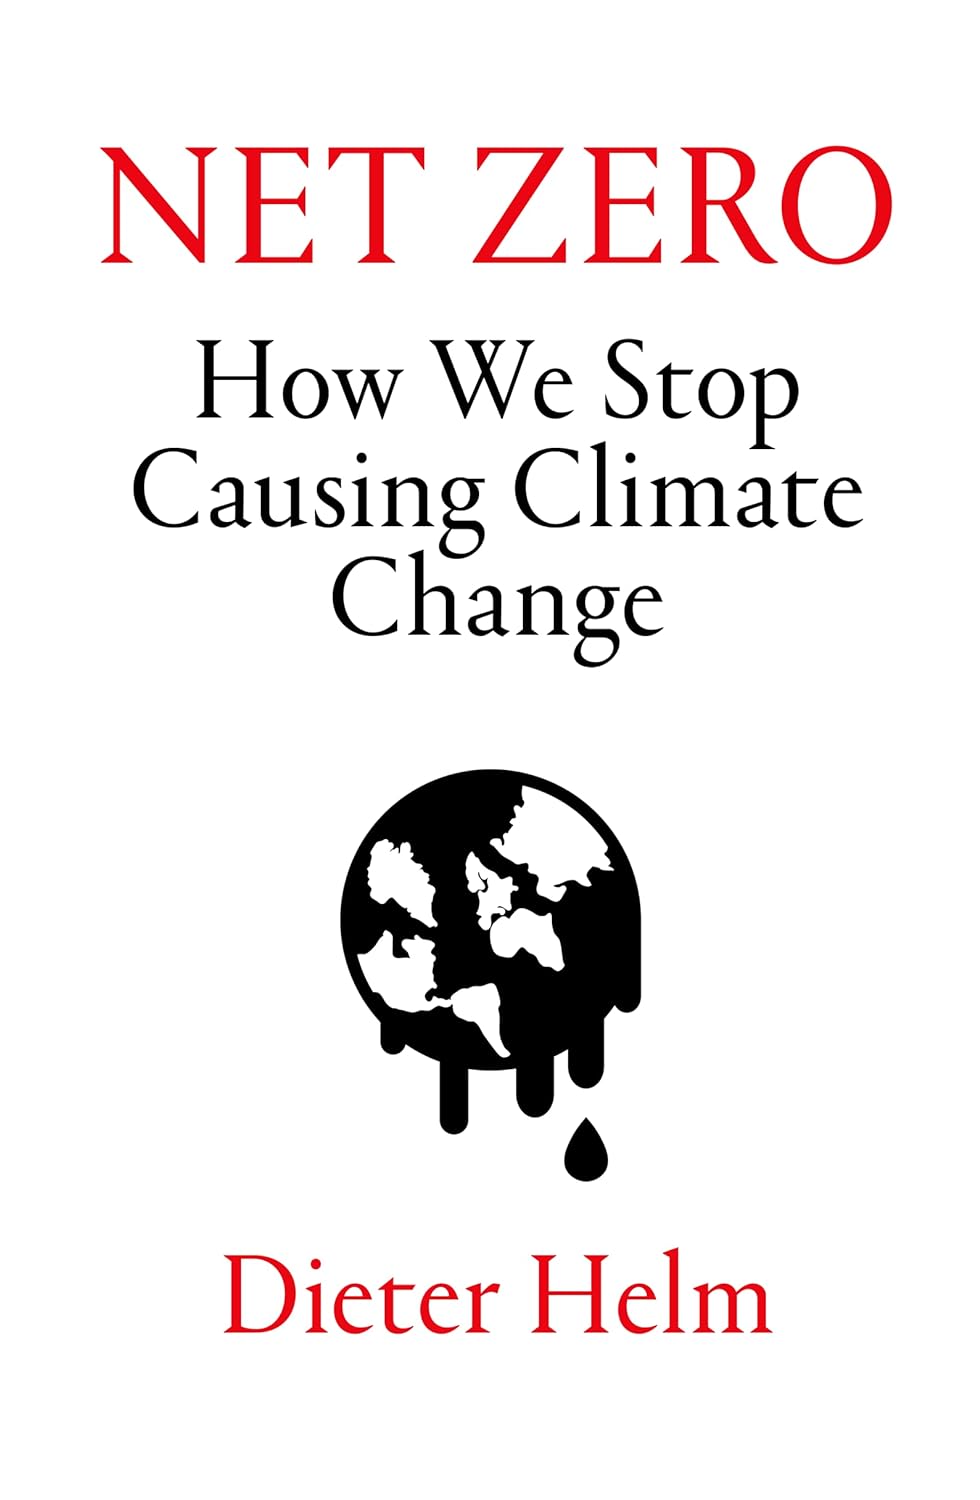 Net Zero: How We Stop Causing Climate Change - Limited-Time Specials - Save 25%!